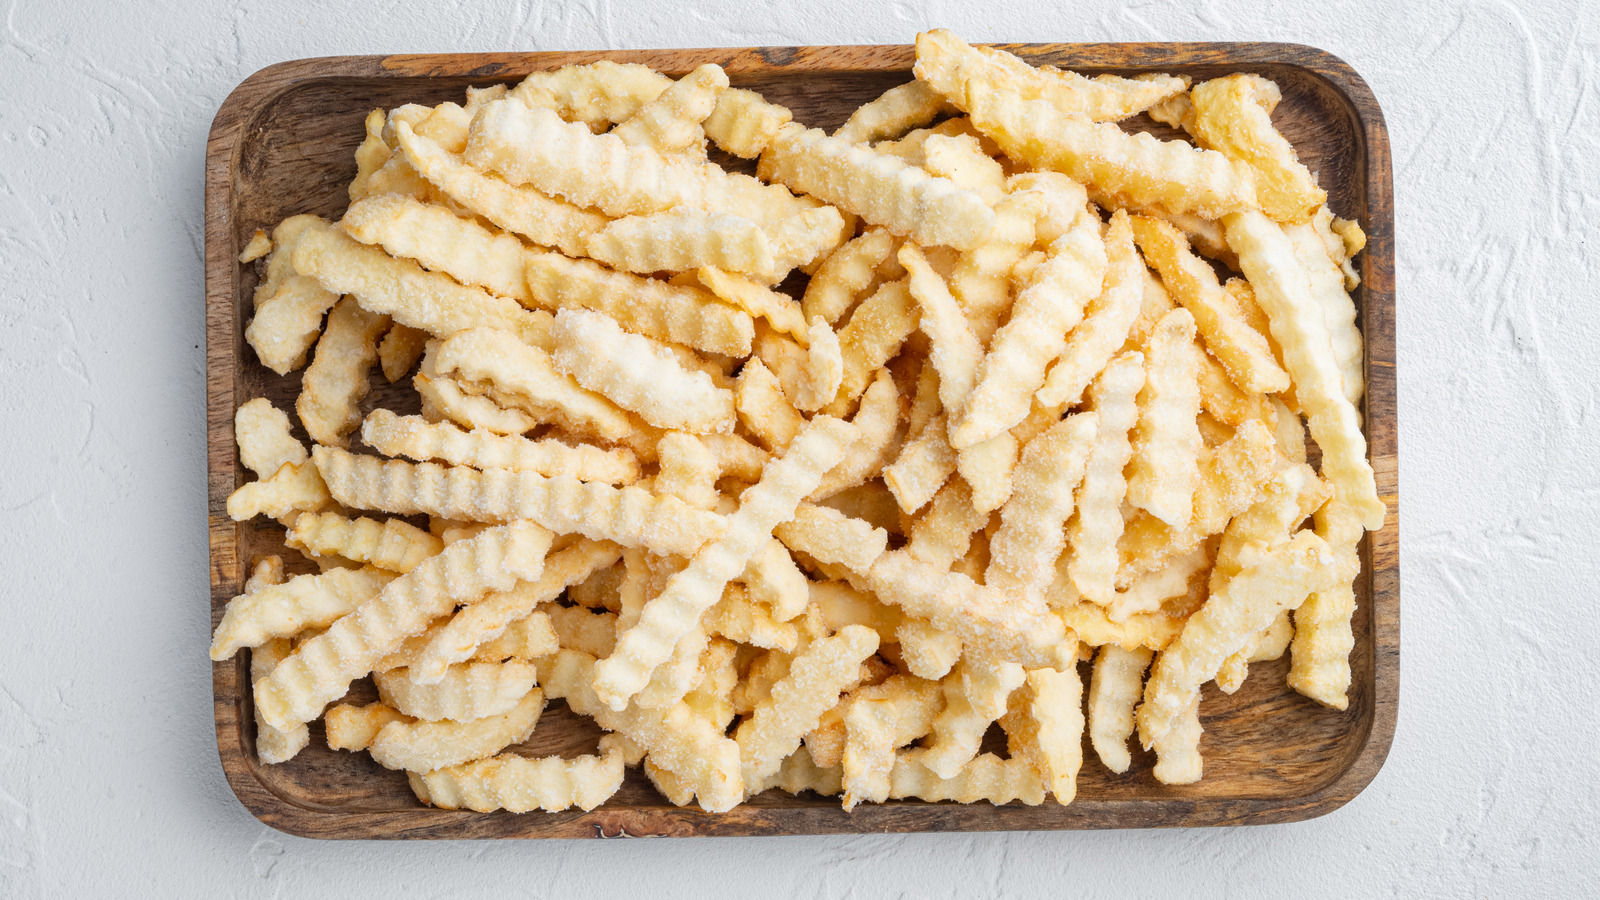 Make REAL Homemade Freezer Fries (DIY frozen French fries from